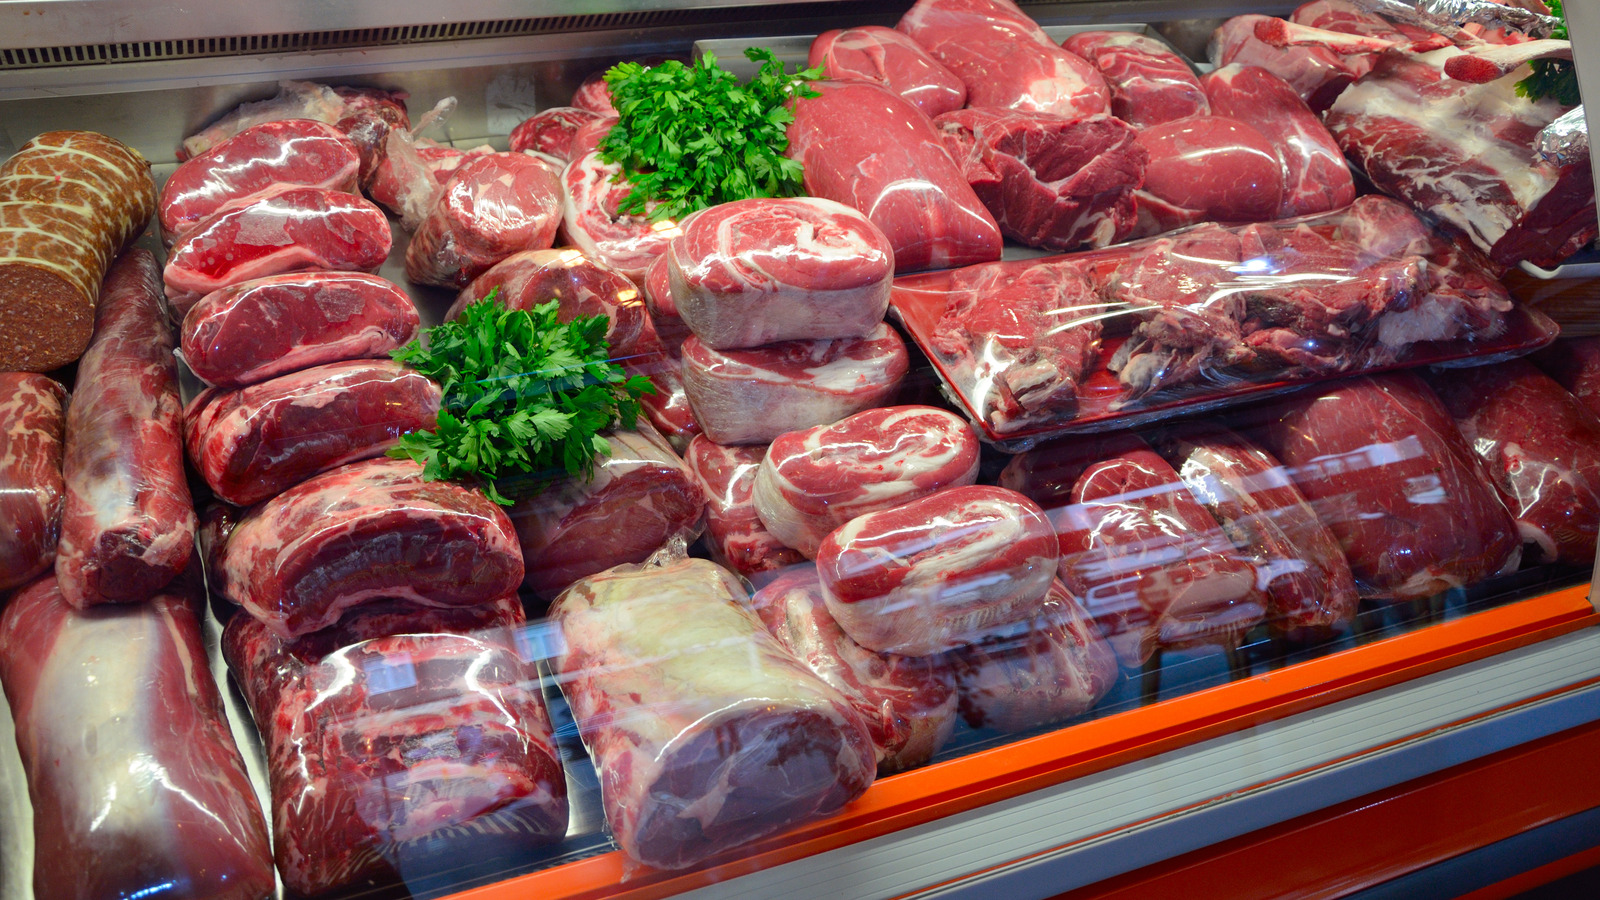 11 Tips You Need When Buying Meat At The Grocery Store